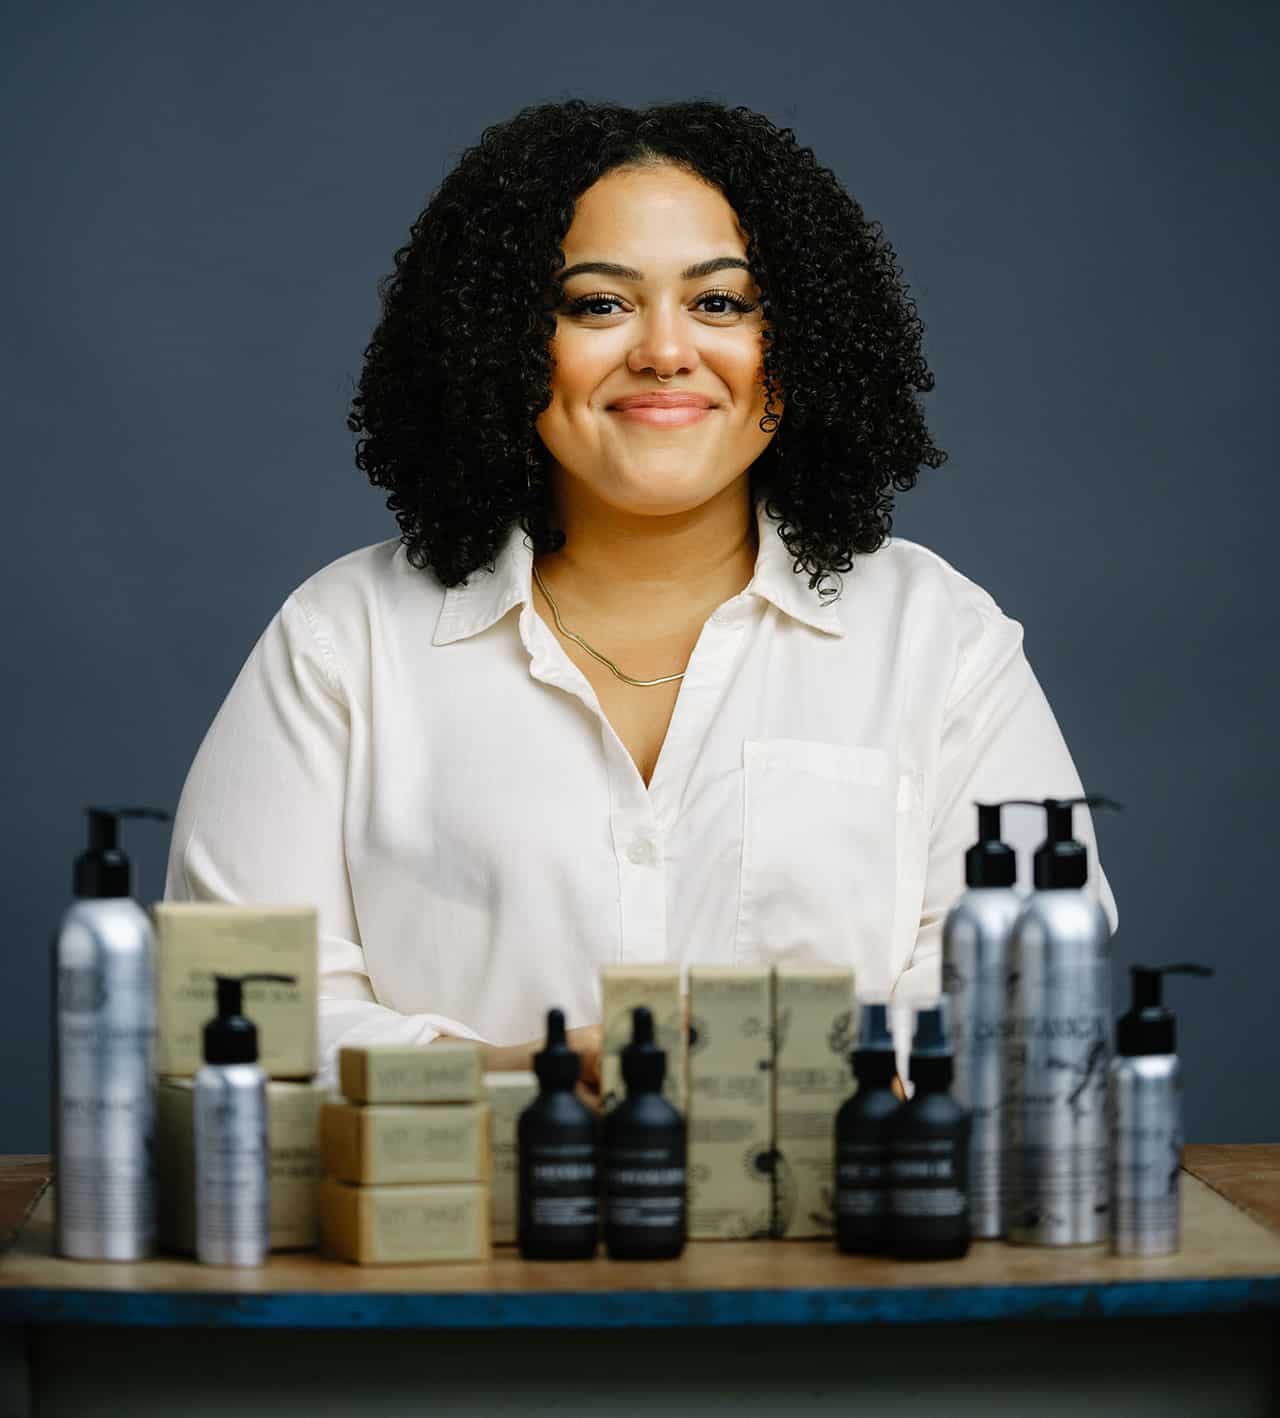 Dominiqe-Taylor with her products, Consciously-Curly Co.